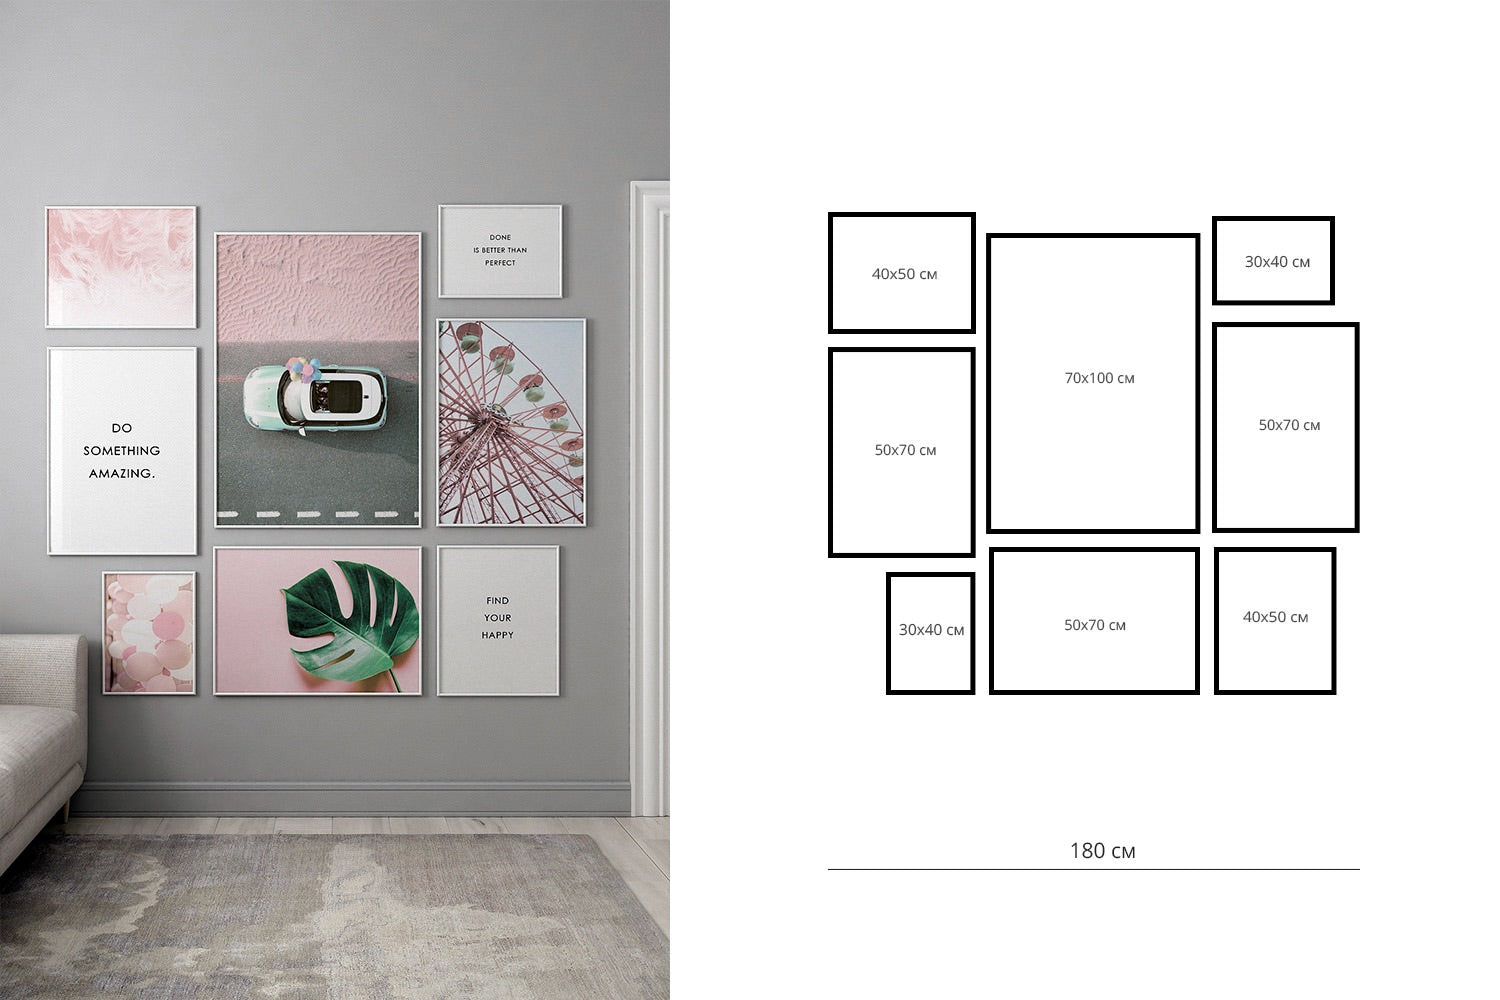 eight posters wall gallery layout aesthetic posters arrangement template wall decor ideas roomtery